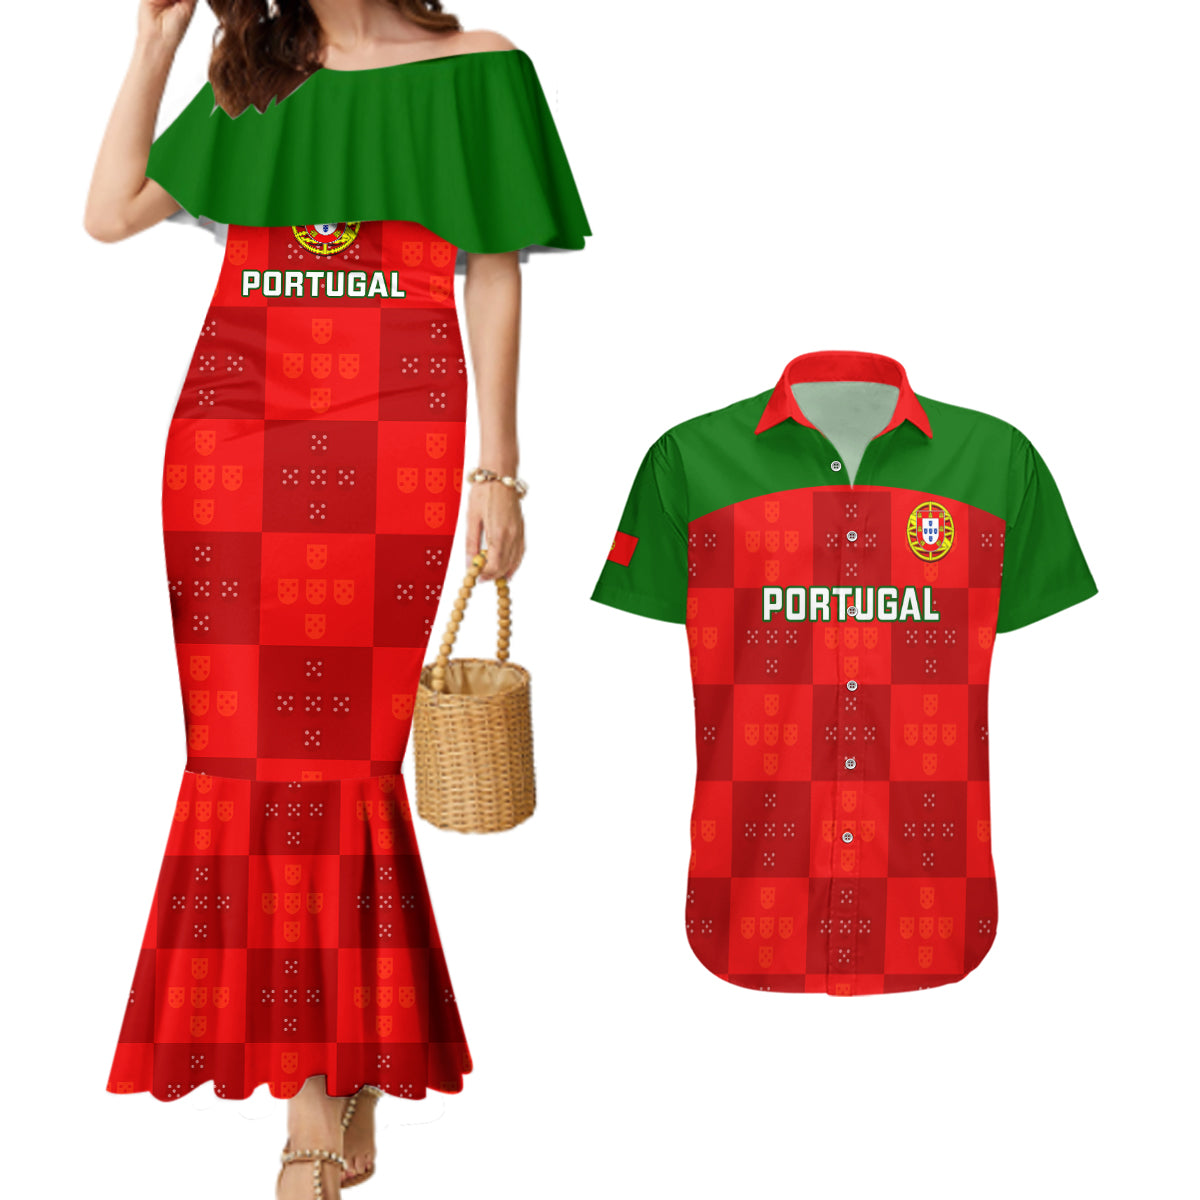 custom-portugal-rugby-couples-matching-mermaid-dress-and-hawaiian-shirt-go-wolves-mix-coat-of-arms